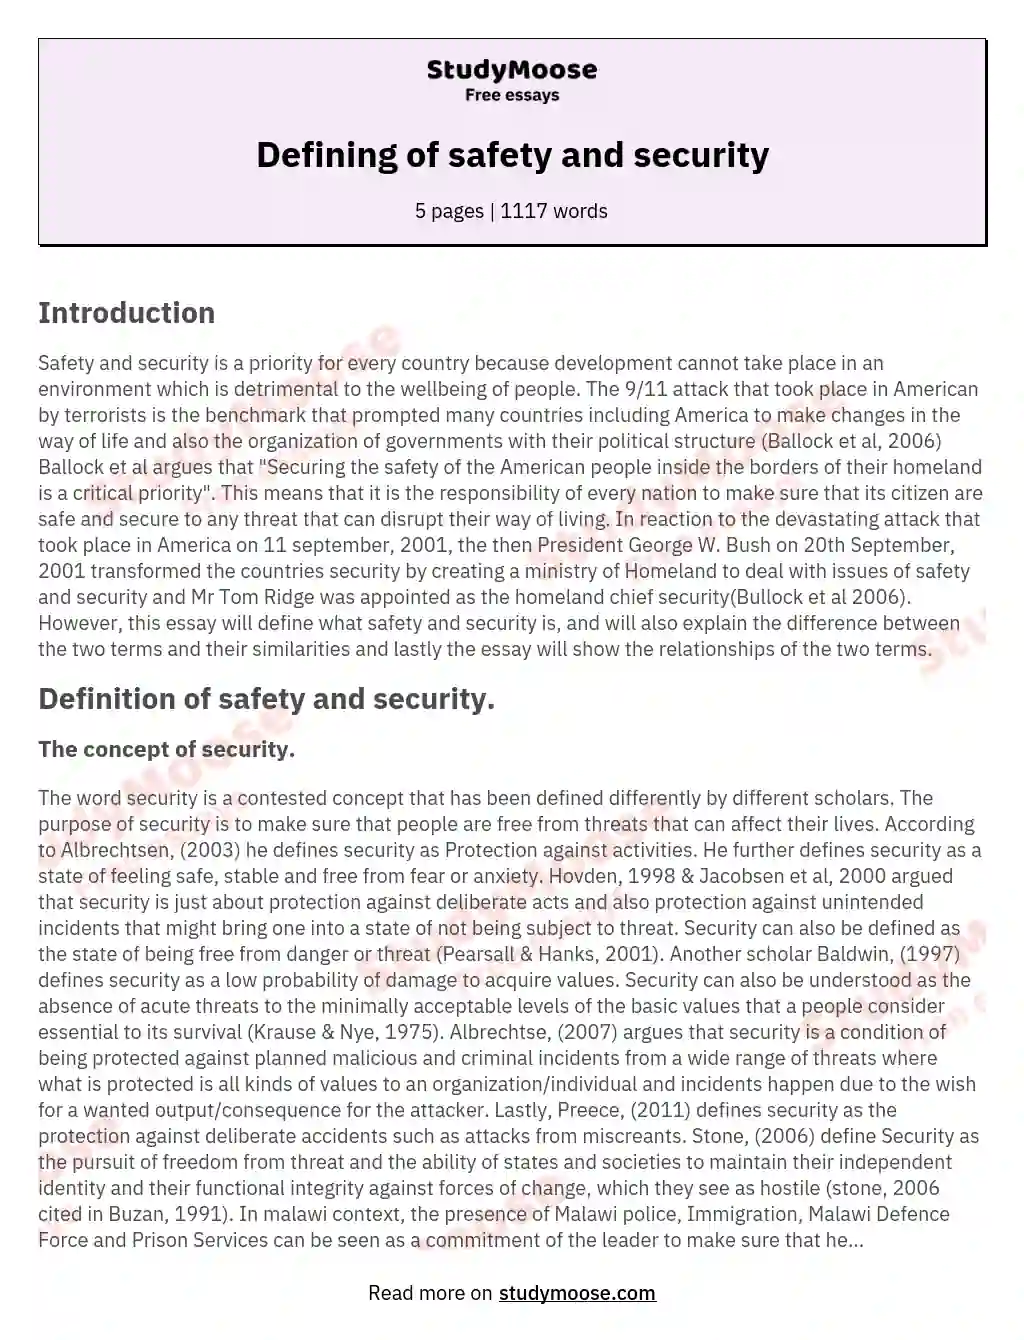 Defining of safety and security essay